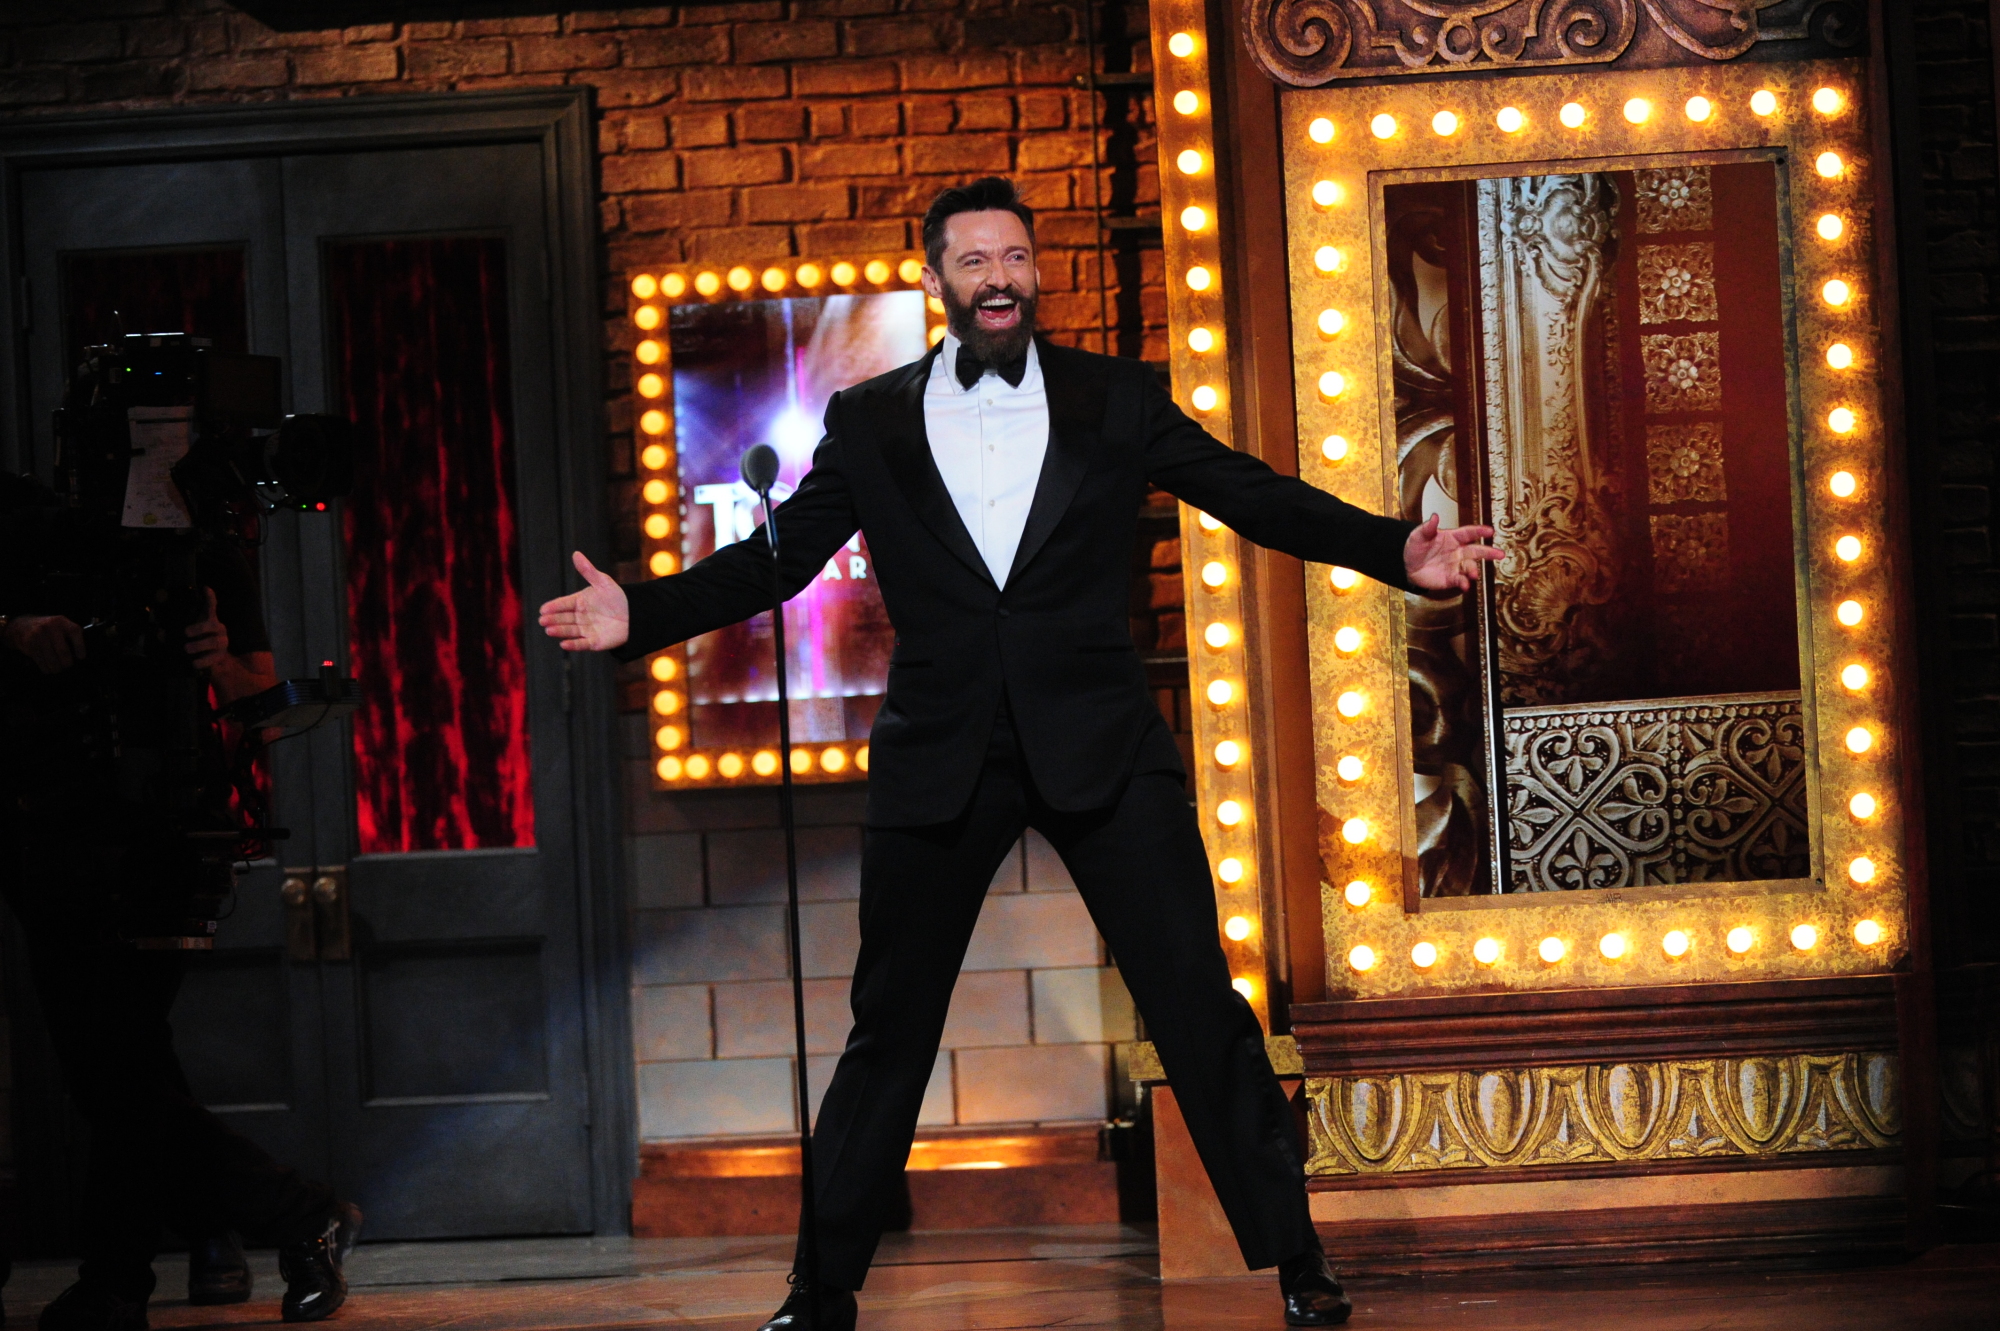 Hugh Jackman hosts the 2014 Tony Awards at Radio City Music Hall in New York. (Heather Wines—CBS/Getty Images)